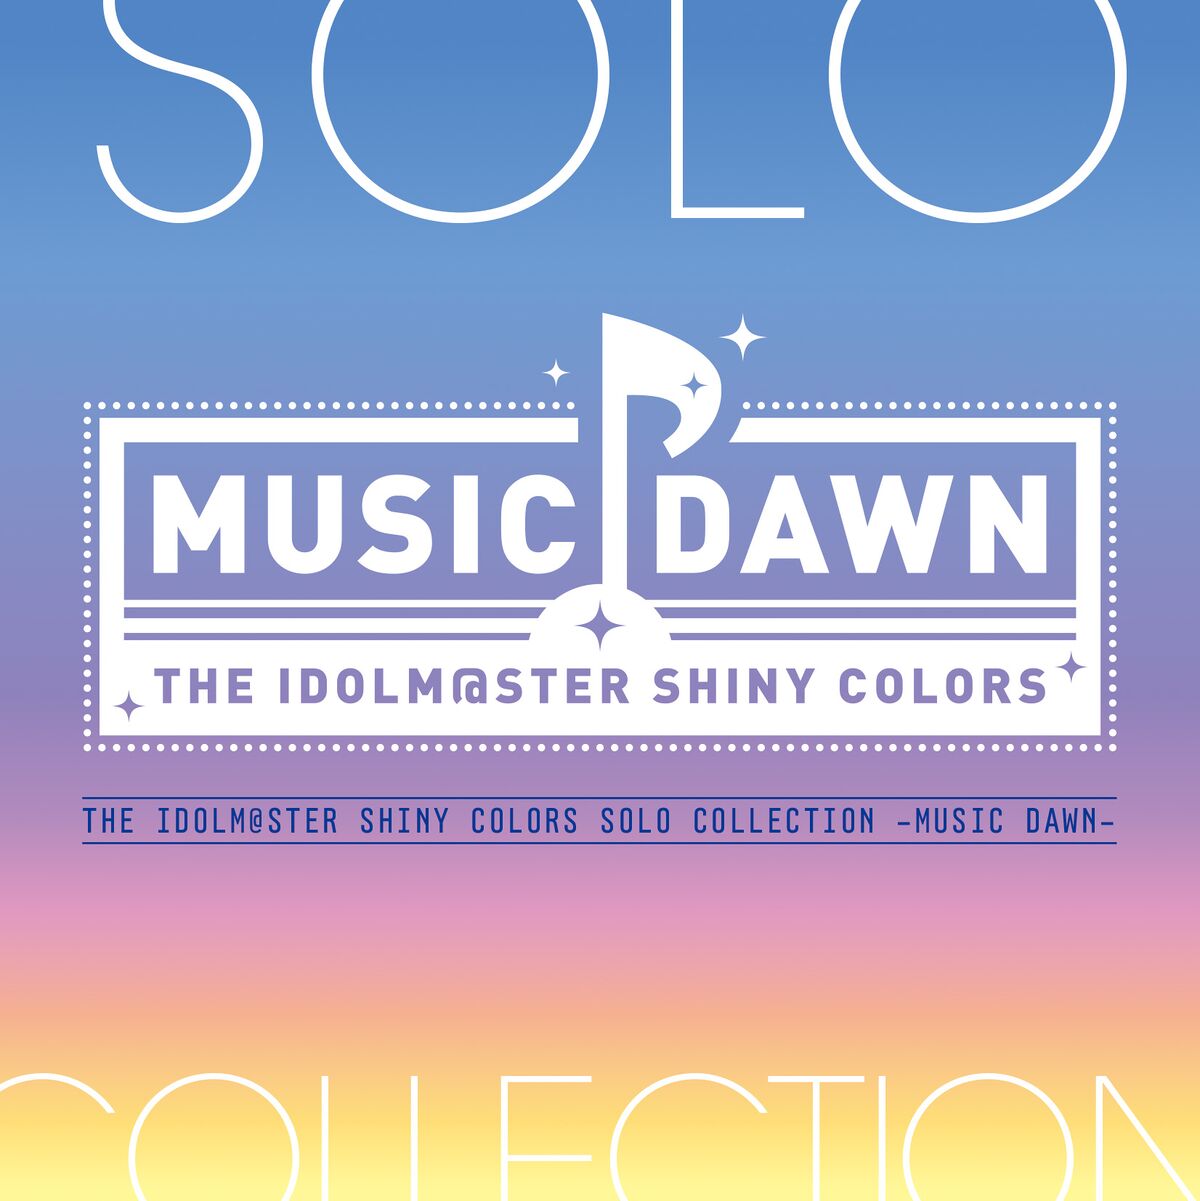 THE IDOLM@STER SHINY COLORS SOLO COLLECTION -MUSIC DAWN- Shinycolors Wiki